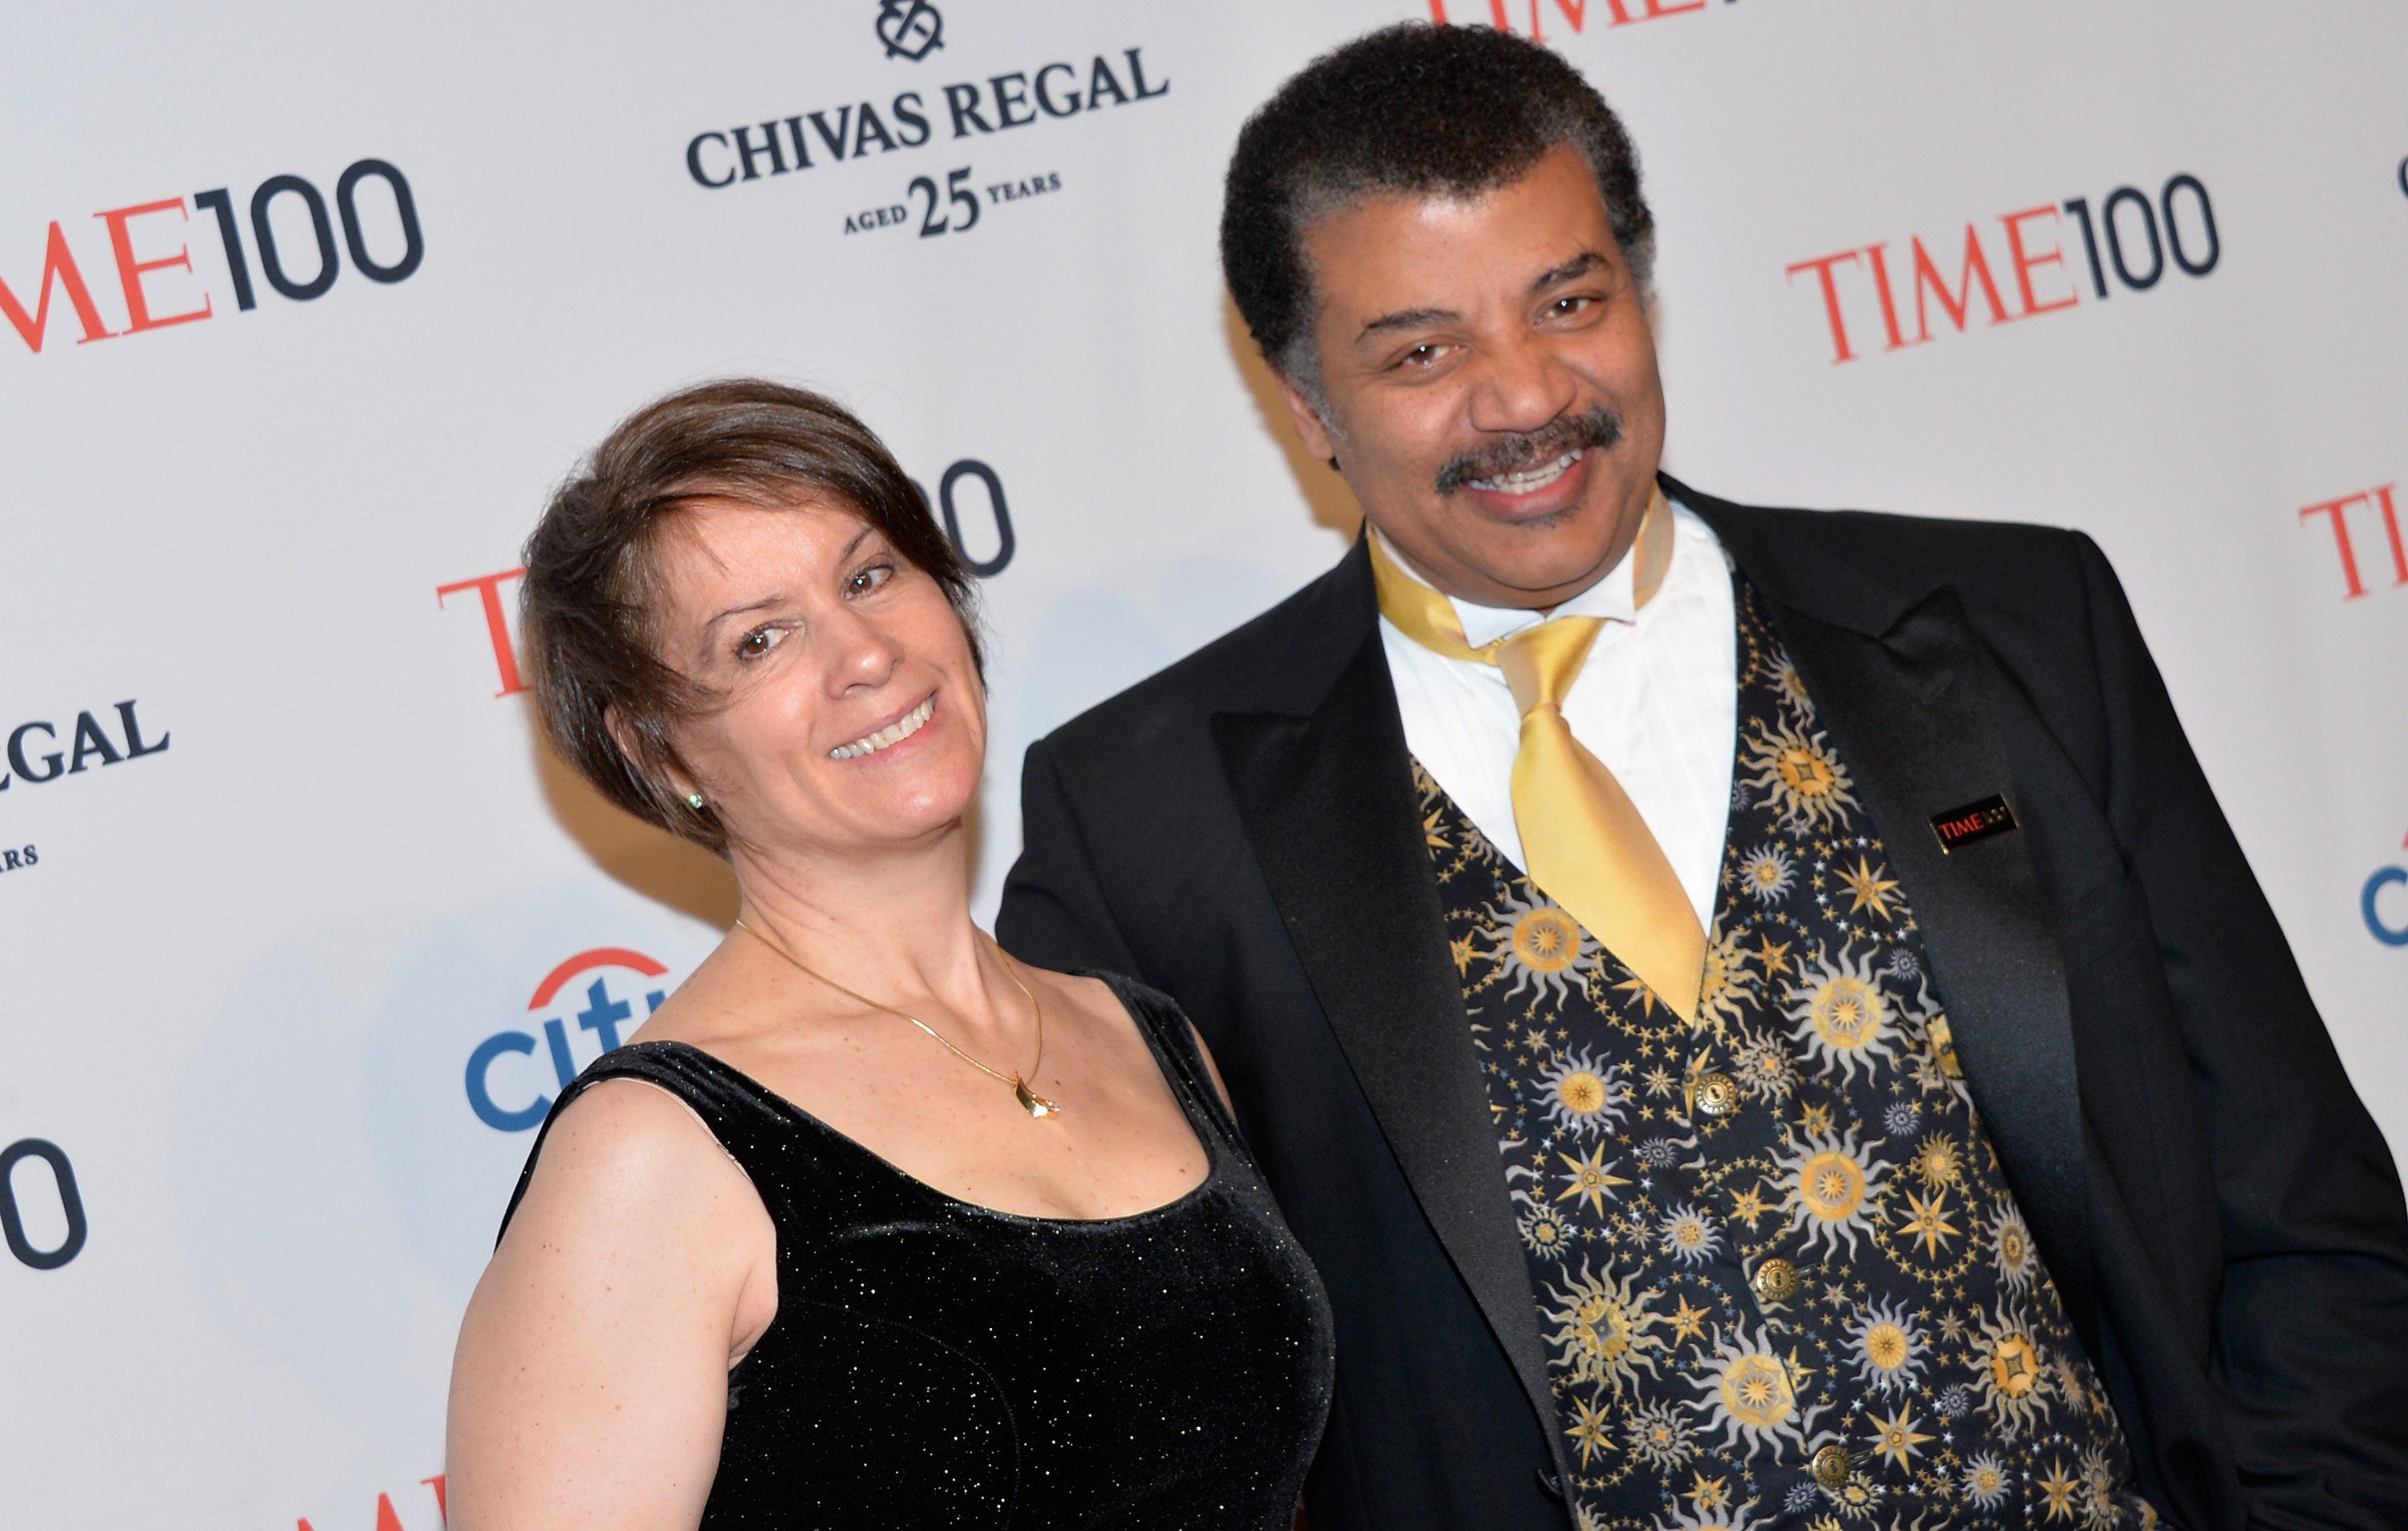 Alice Young and Neil deGrasse Tyson at the TIME 100 Gala, TIME's 100 Most Influential People in the World, on April 29, 2014, in New York City. | Source: Getty Images